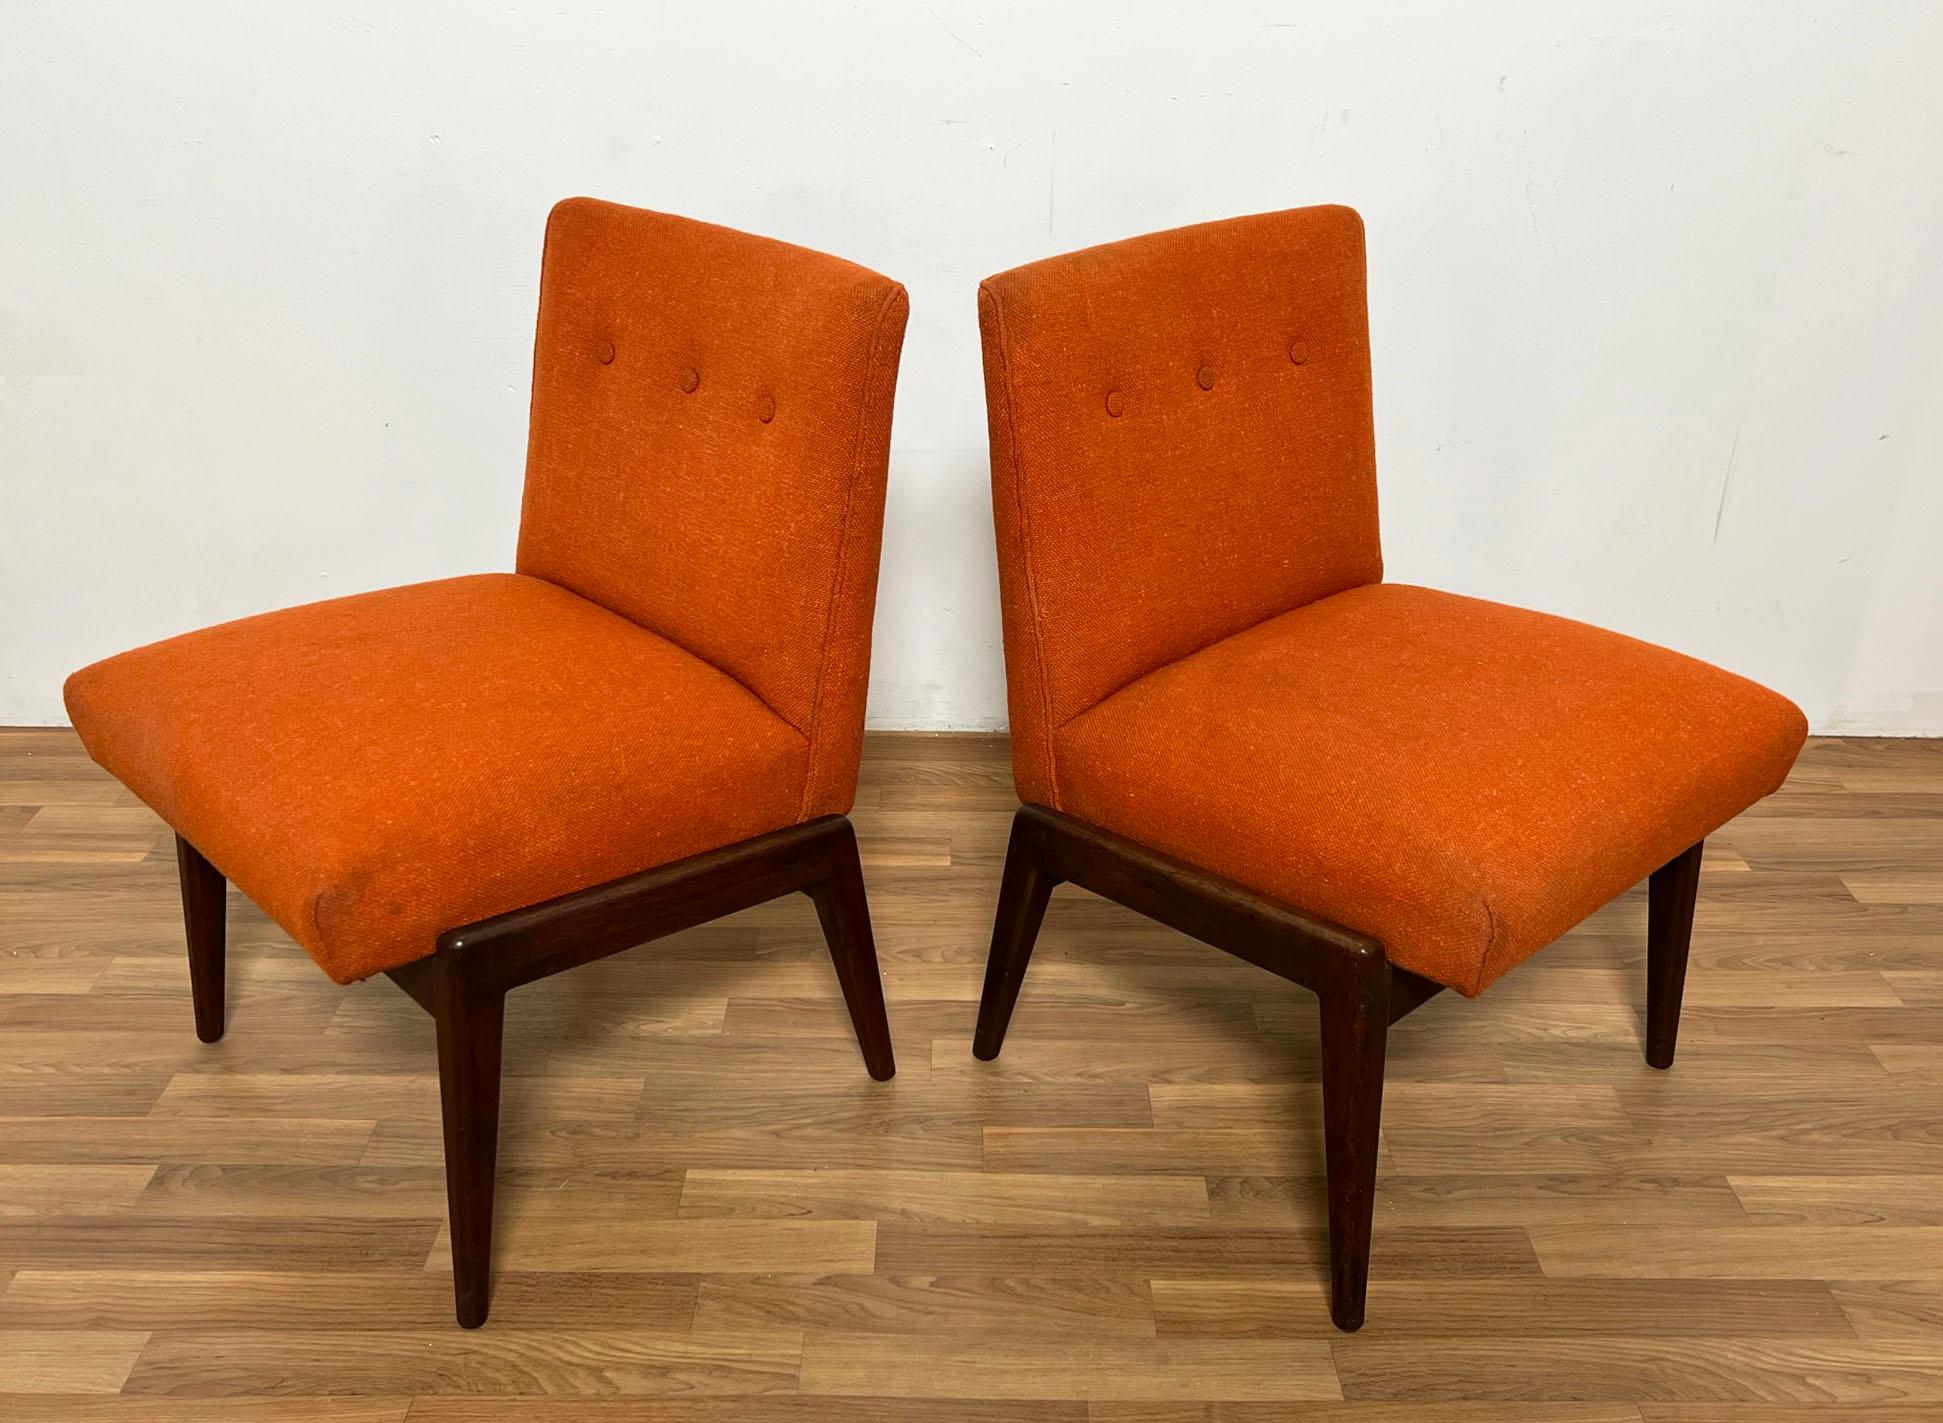 Pair of model C-220 slipper lounge chairs by Jens Risom, Circa 1950s.